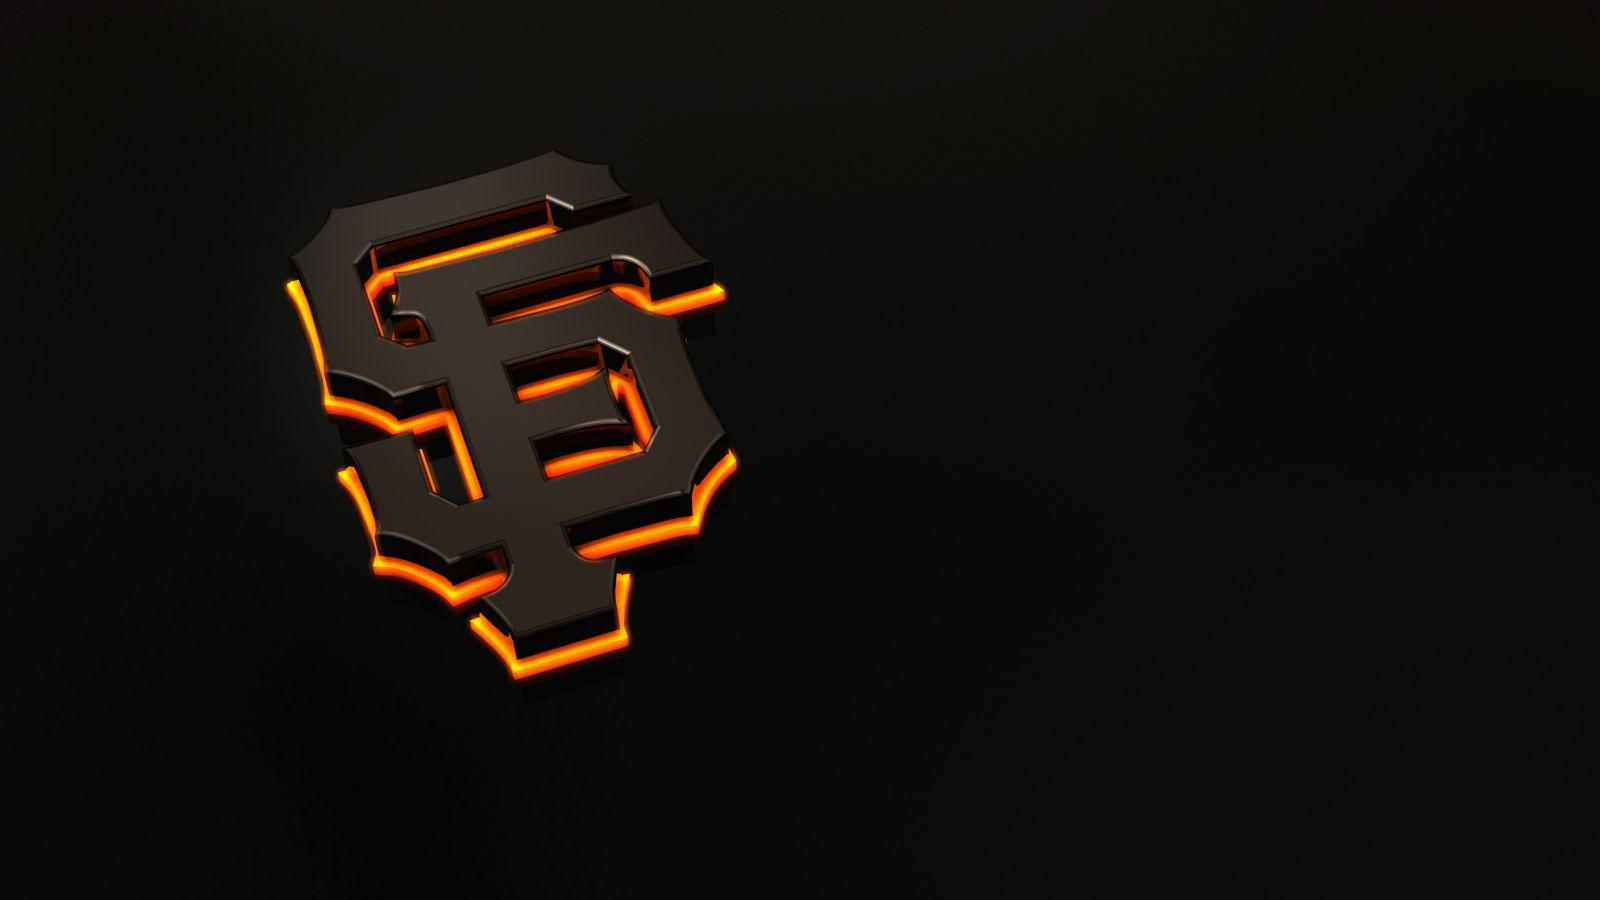 San Francisco Giants Wallpaper and Background Imagex900